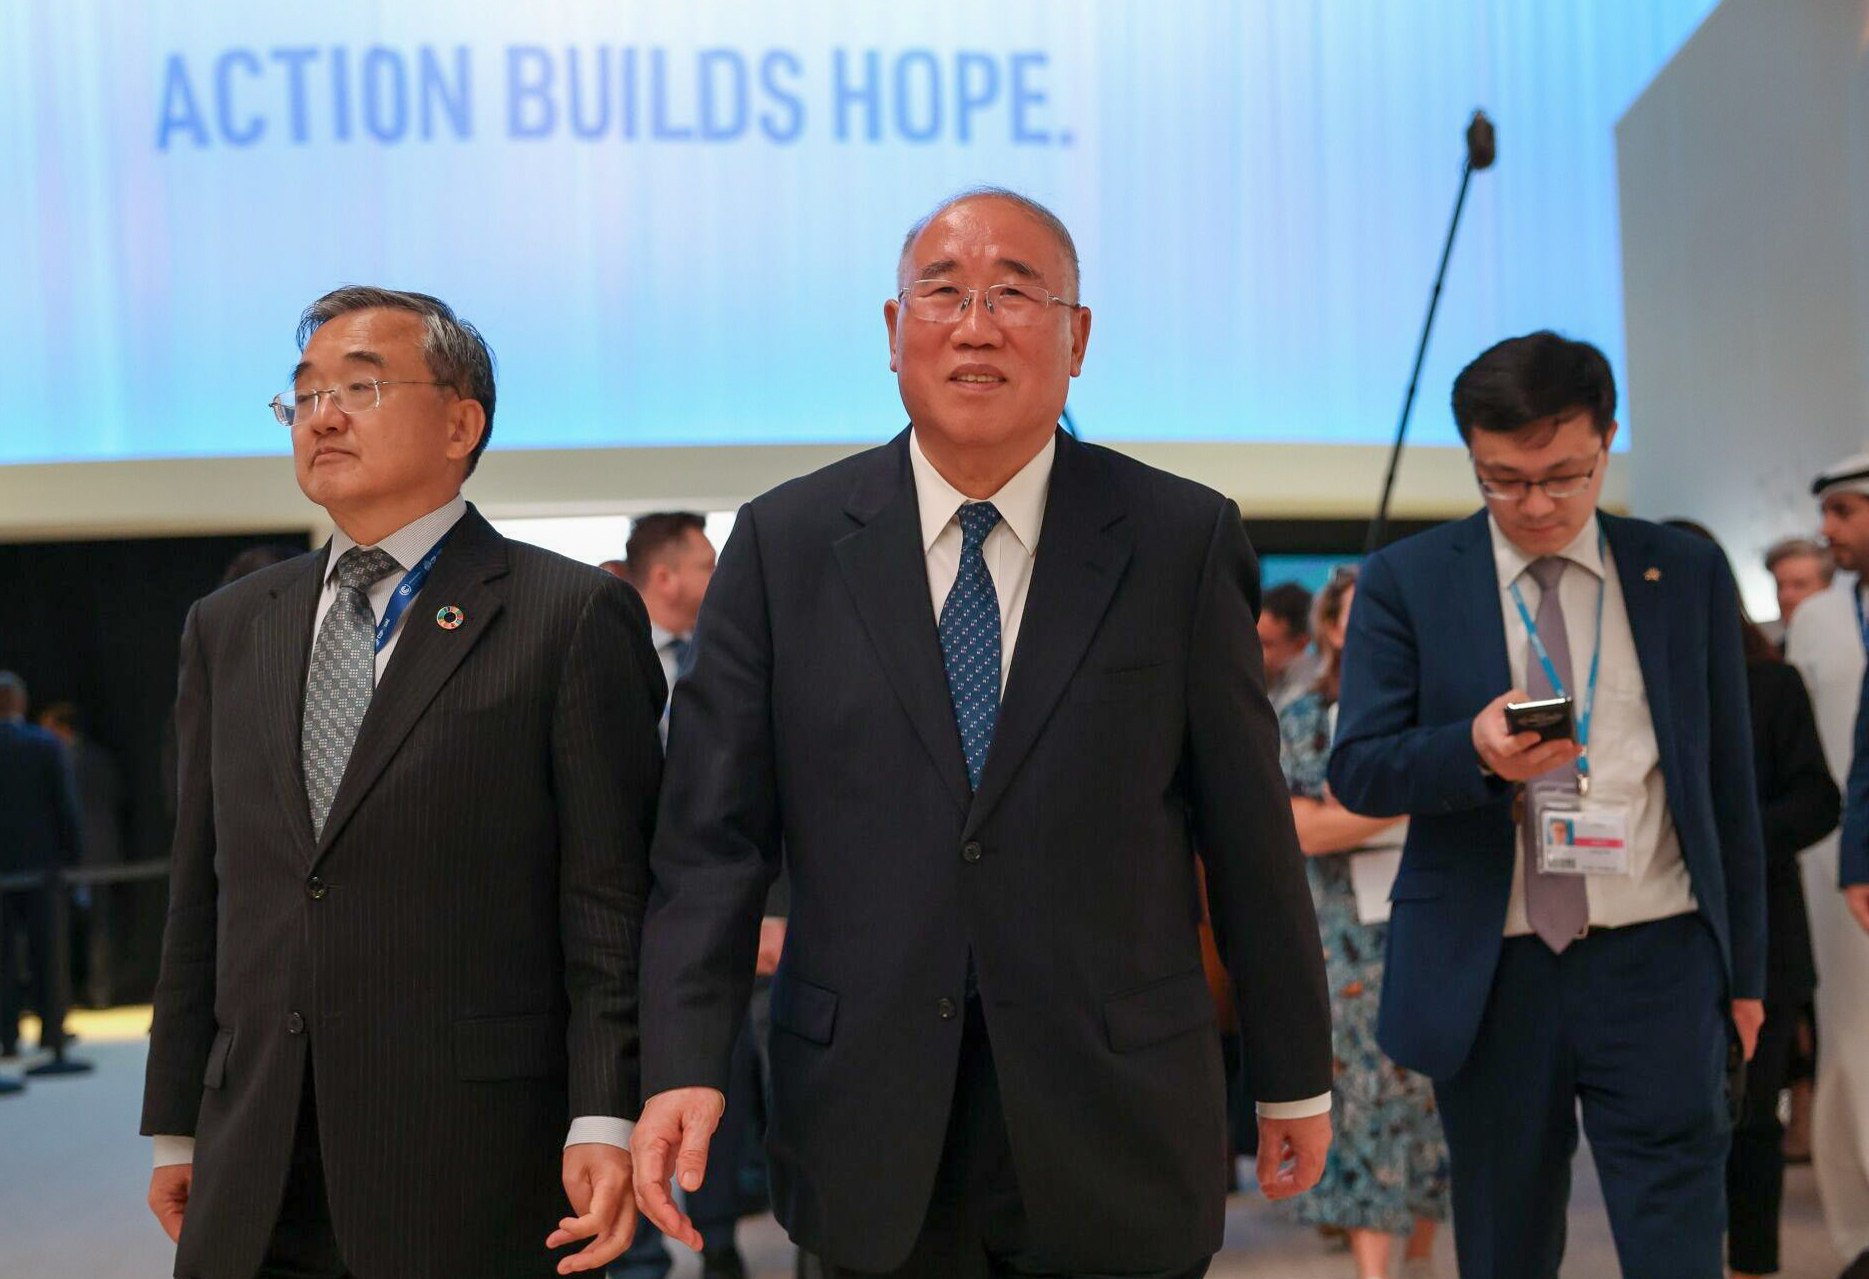 Xie Zhenhua, China’s special envoy for climate change, on December 2, the third day of Cop28 in Dubai. Photo: Bloomberg